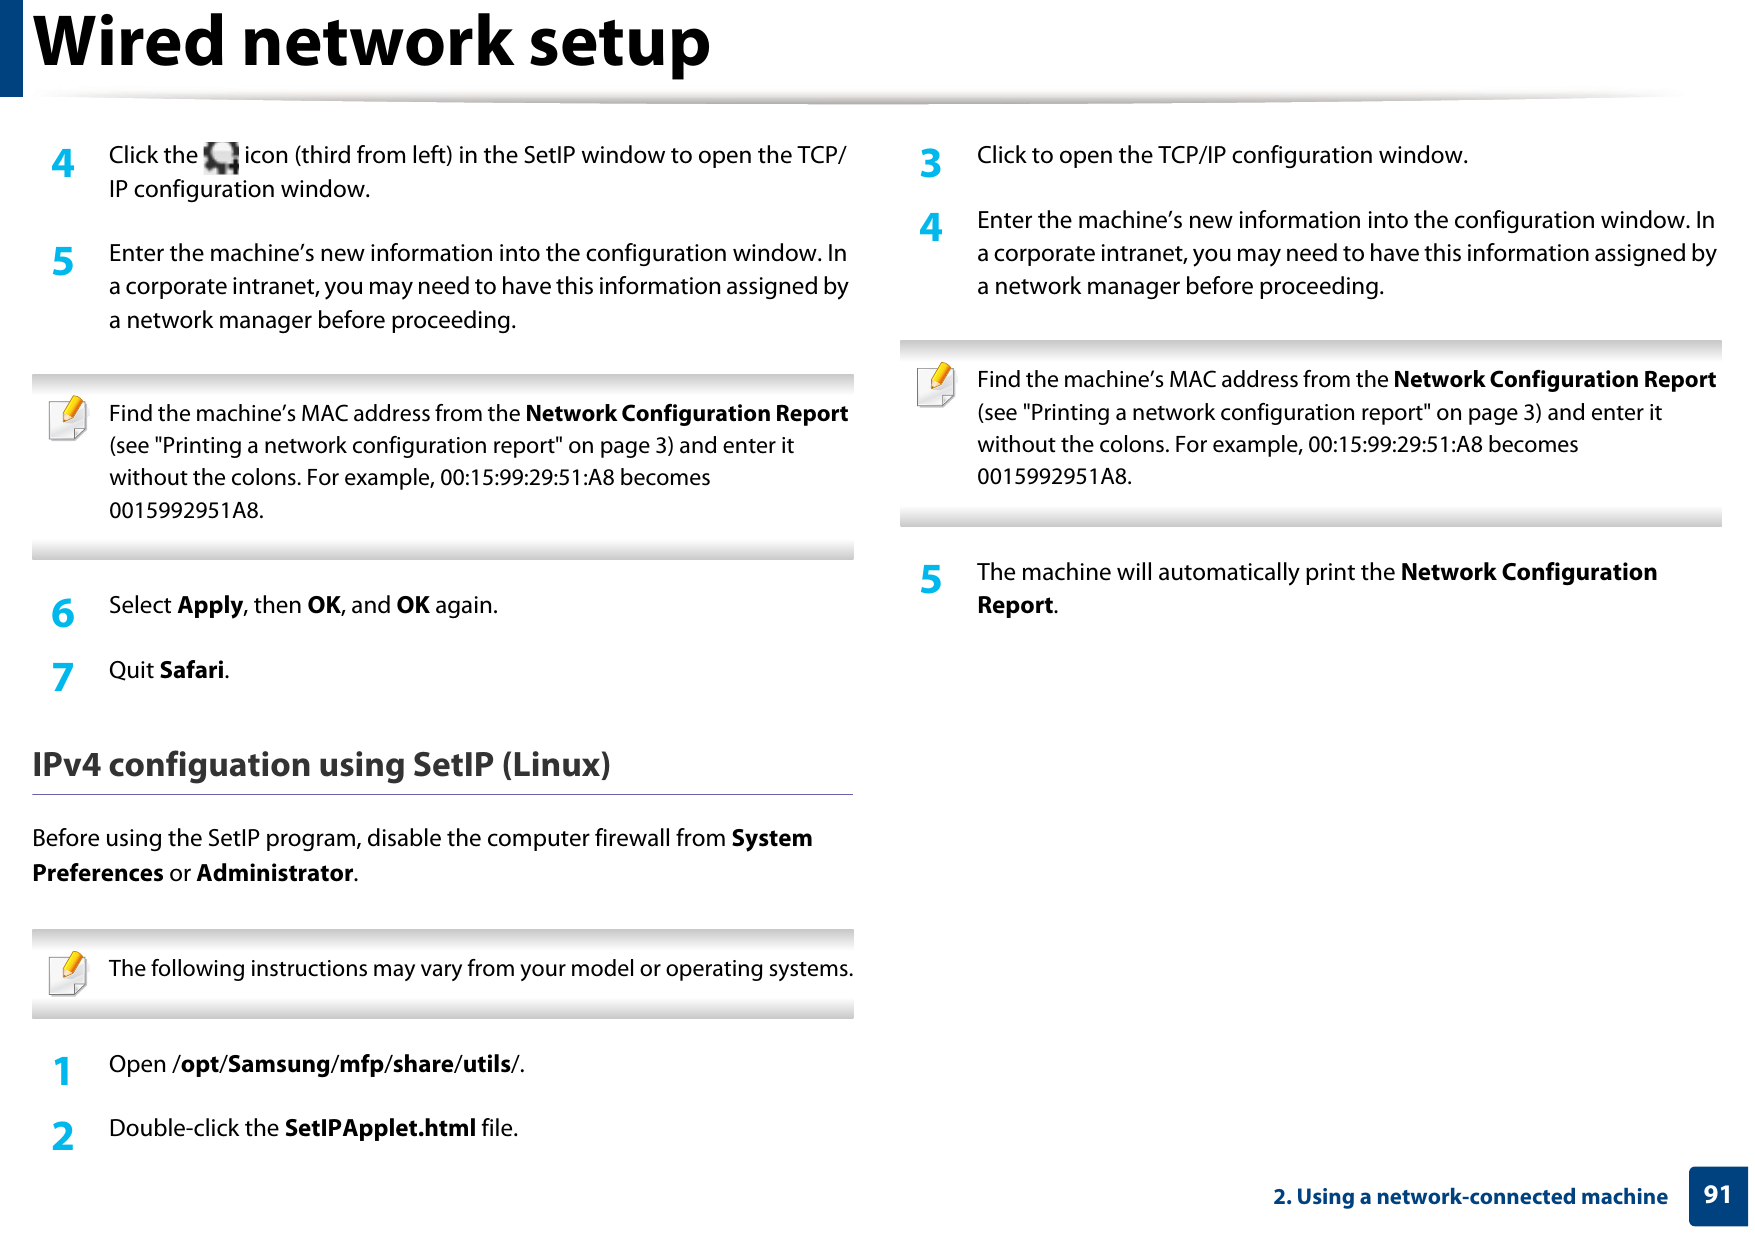 Wired network setup912. Using a network-connected machine4  Click the   icon (third from left) in the SetIP window to open the TCP/IP configuration window.5  Enter the machine’s new information into the configuration window. In a corporate intranet, you may need to have this information assigned by a network manager before proceeding. Find the machine’s MAC address from the Network Configuration Report (see &quot;Printing a network configuration report&quot; on page 3) and enter it without the colons. For example, 00:15:99:29:51:A8 becomes 0015992951A8. 6  Select Apply, then OK, and OK again.7  Quit Safari.IPv4 configuation using SetIP (Linux)Before using the SetIP program, disable the computer firewall from System Preferences or Administrator. The following instructions may vary from your model or operating systems. 1Open /opt/Samsung/mfp/share/utils/.2  Double-click the SetIPApplet.html file. 3  Click to open the TCP/IP configuration window. 4  Enter the machine’s new information into the configuration window. In a corporate intranet, you may need to have this information assigned by a network manager before proceeding. Find the machine’s MAC address from the Network Configuration Report (see &quot;Printing a network configuration report&quot; on page 3) and enter it without the colons. For example, 00:15:99:29:51:A8 becomes 0015992951A8. 5  The machine will automatically print the Network Configuration Report. 